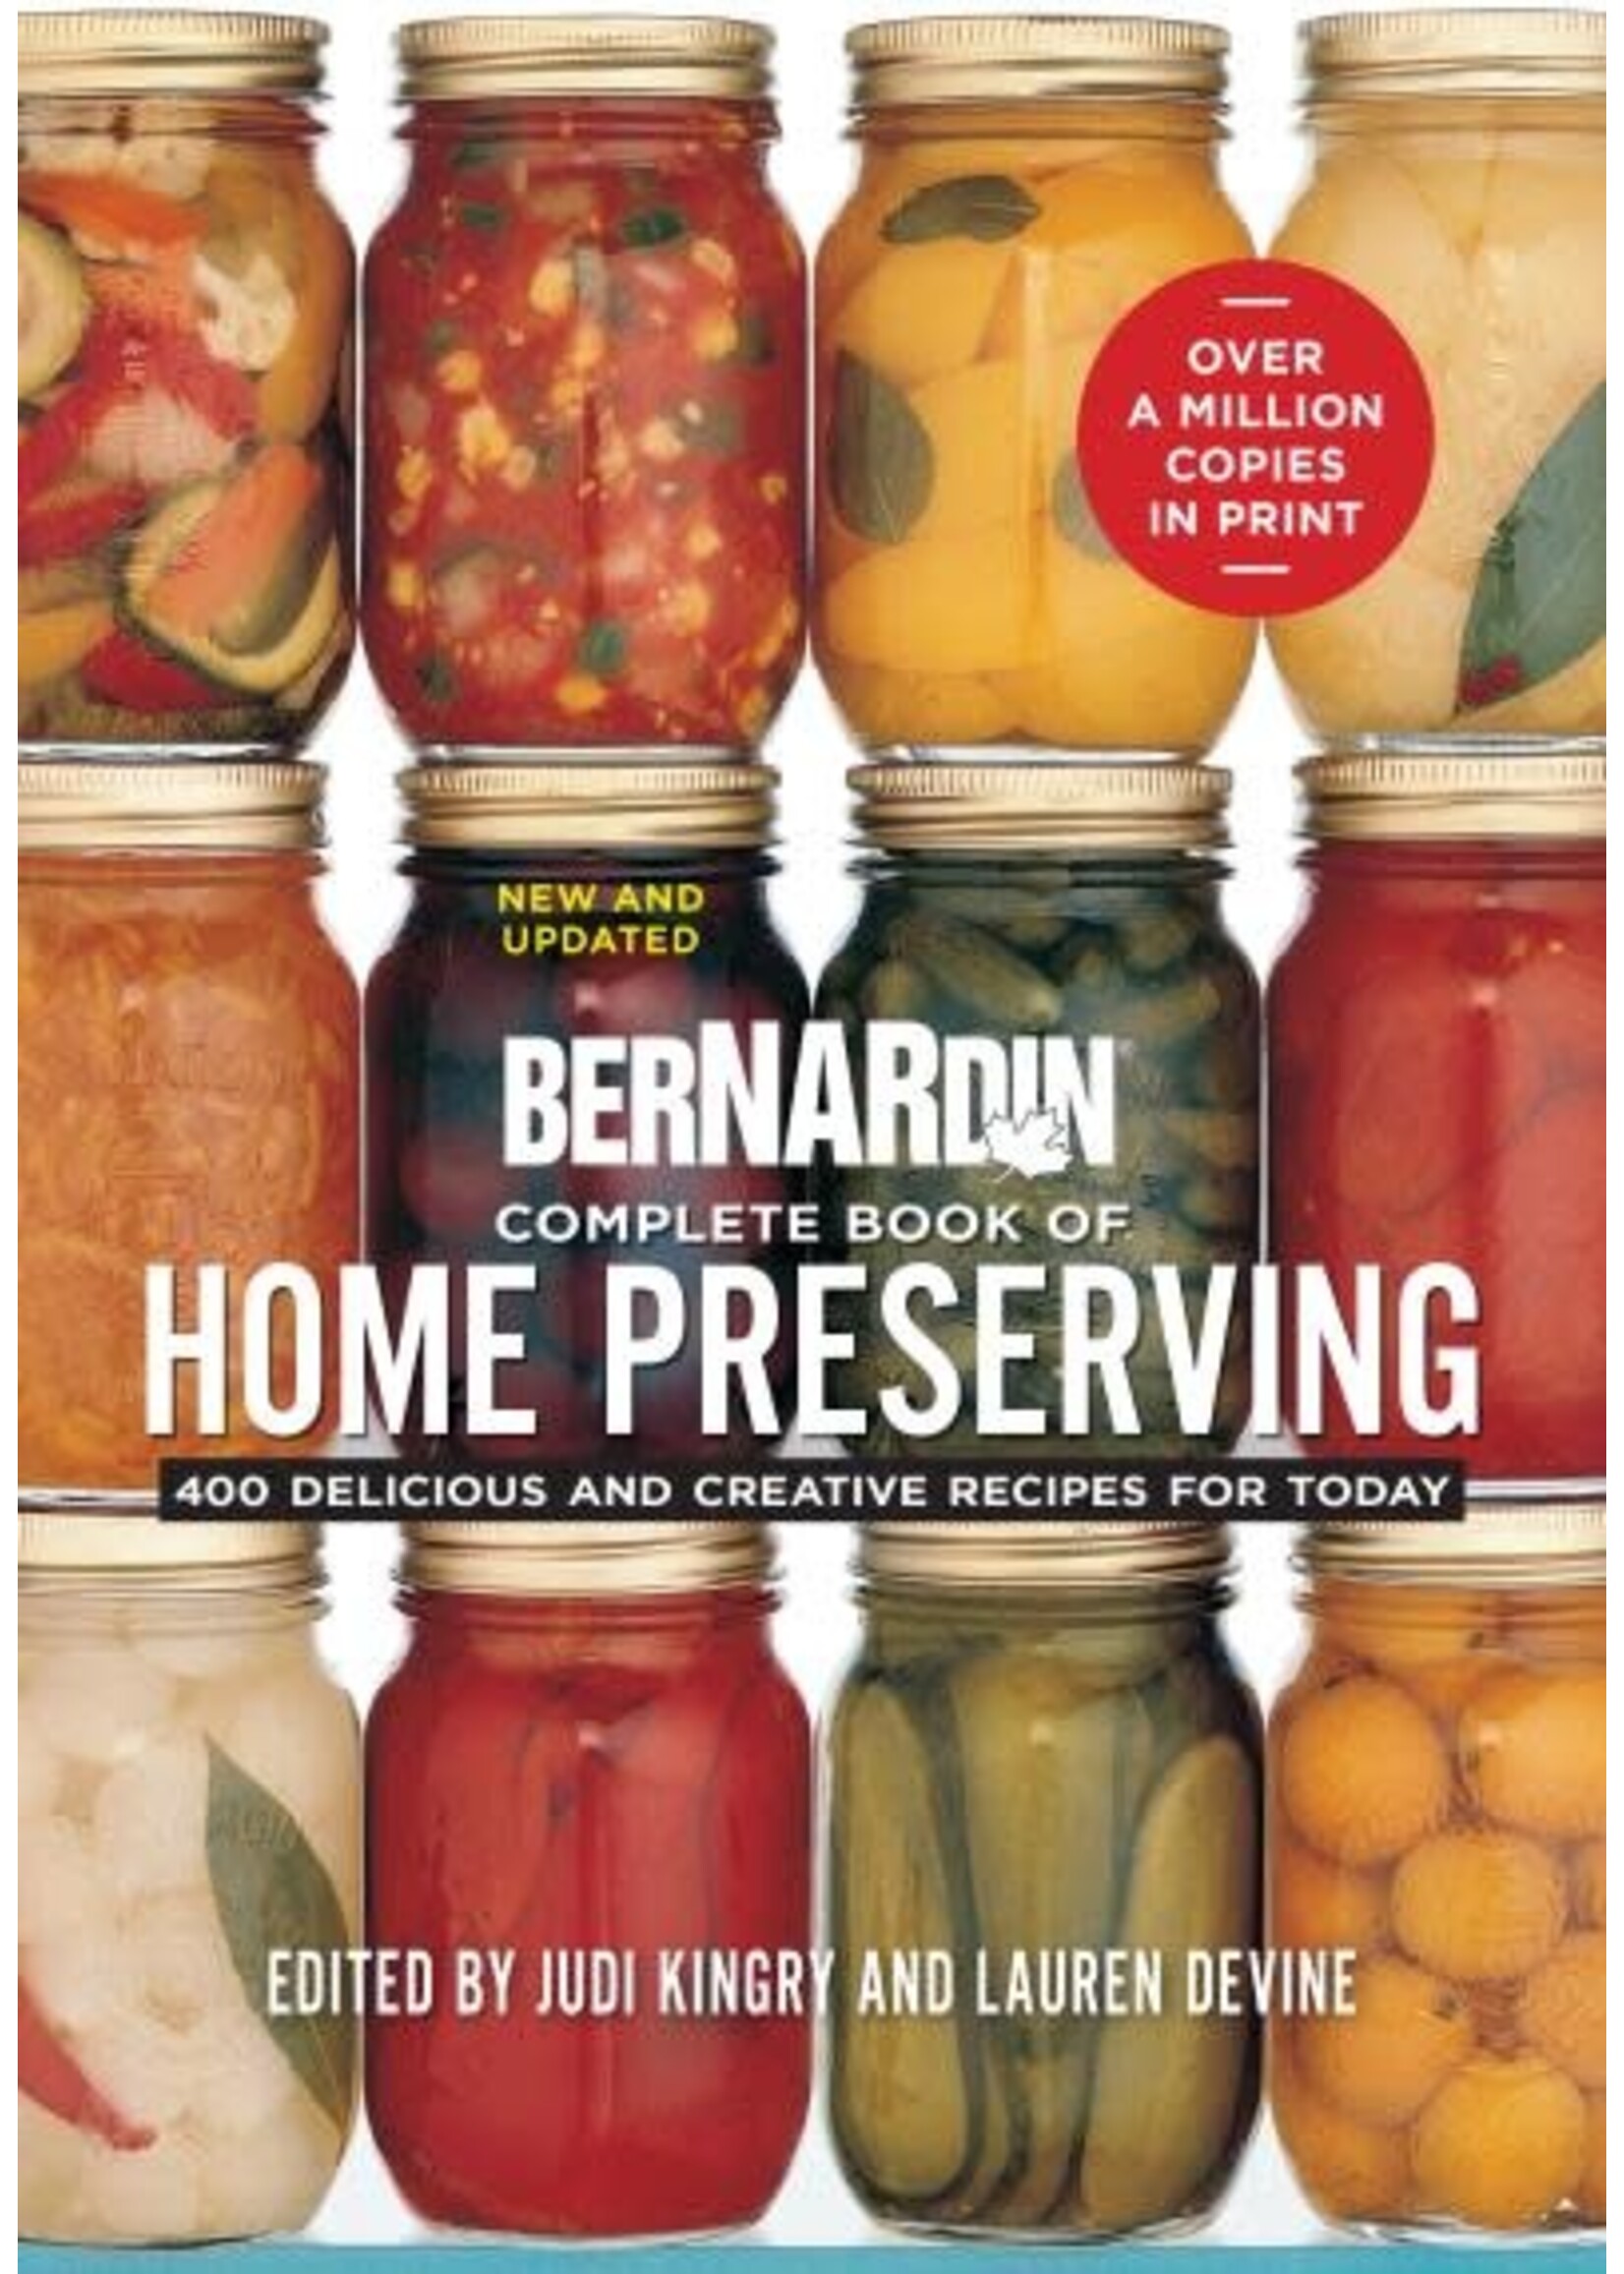 Bernardin Complete Book of Home Preserving: 400 Delicious and Creative Recipes for Today - New and Updated by Judi Kingry, Lauren Devine, Sarah Page